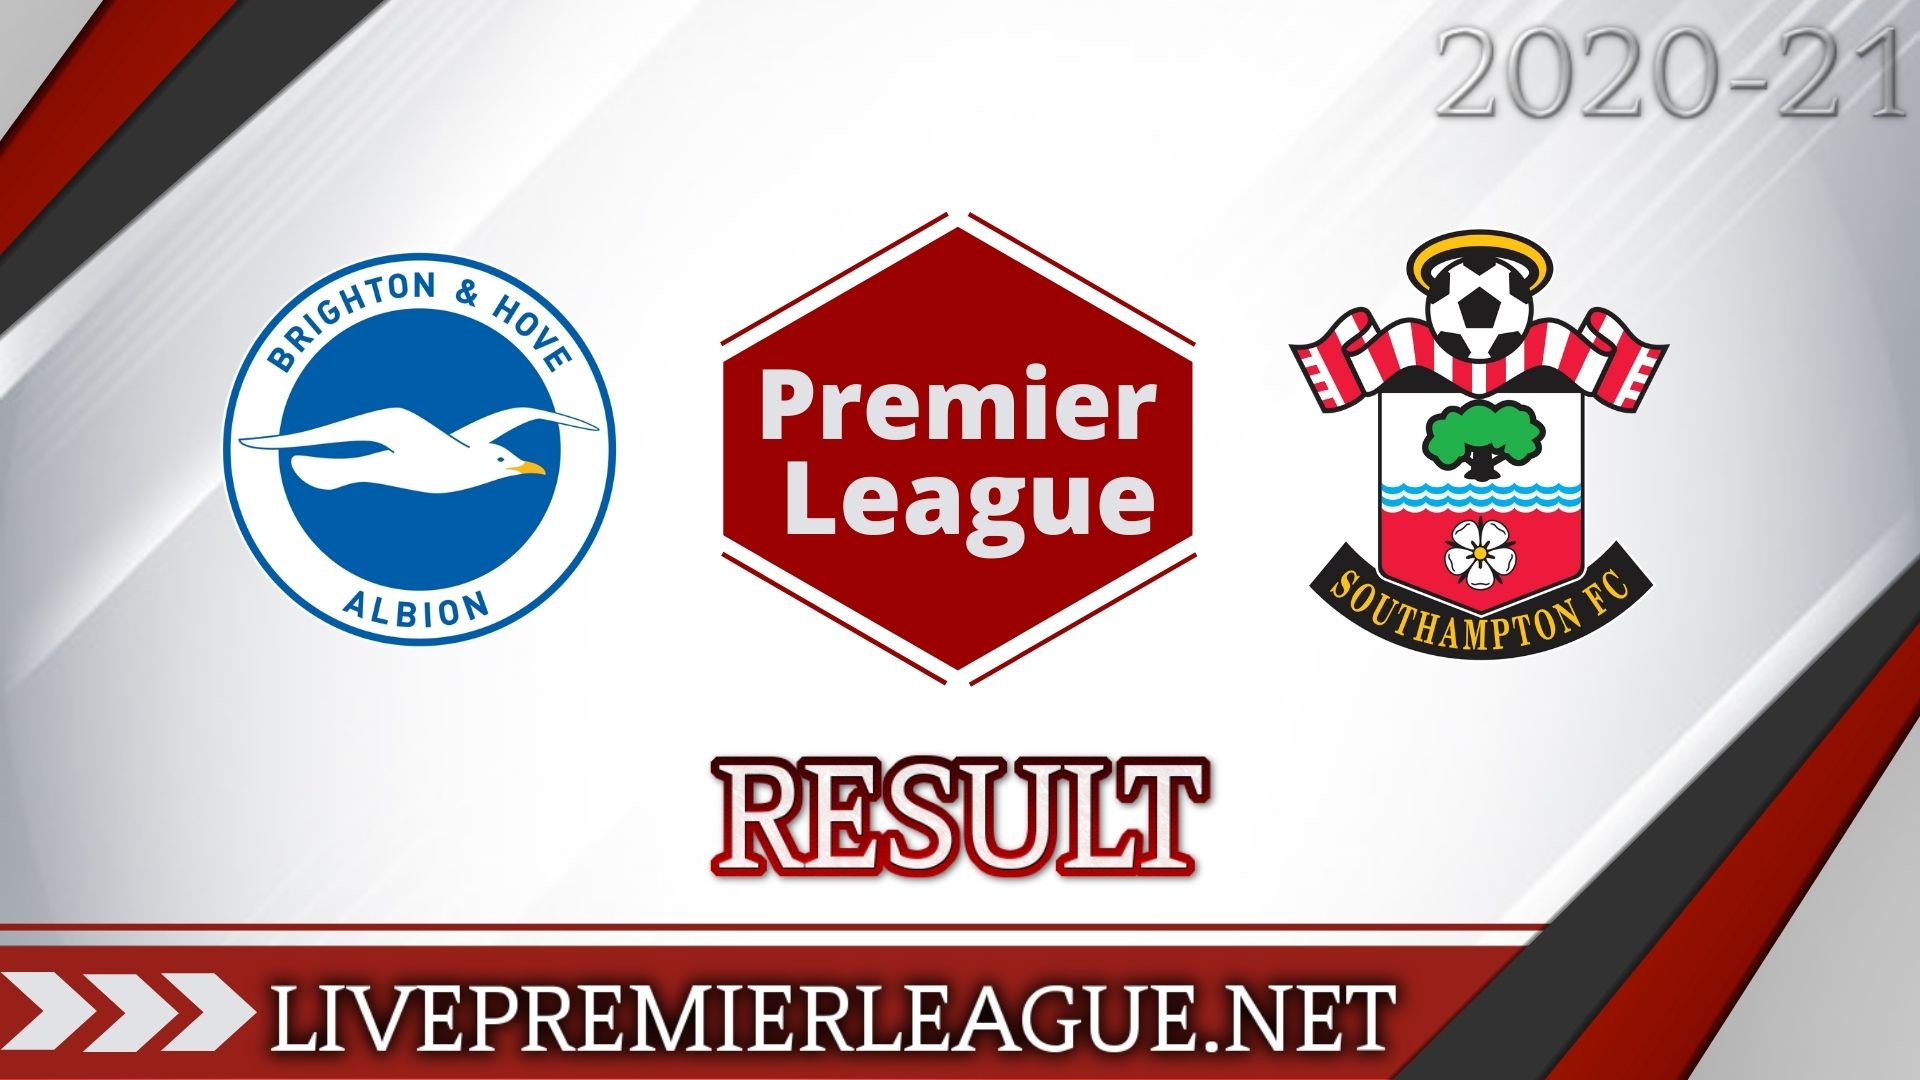 Brighton and Hove Albion Vs Southampton | Week 11 Result 2020